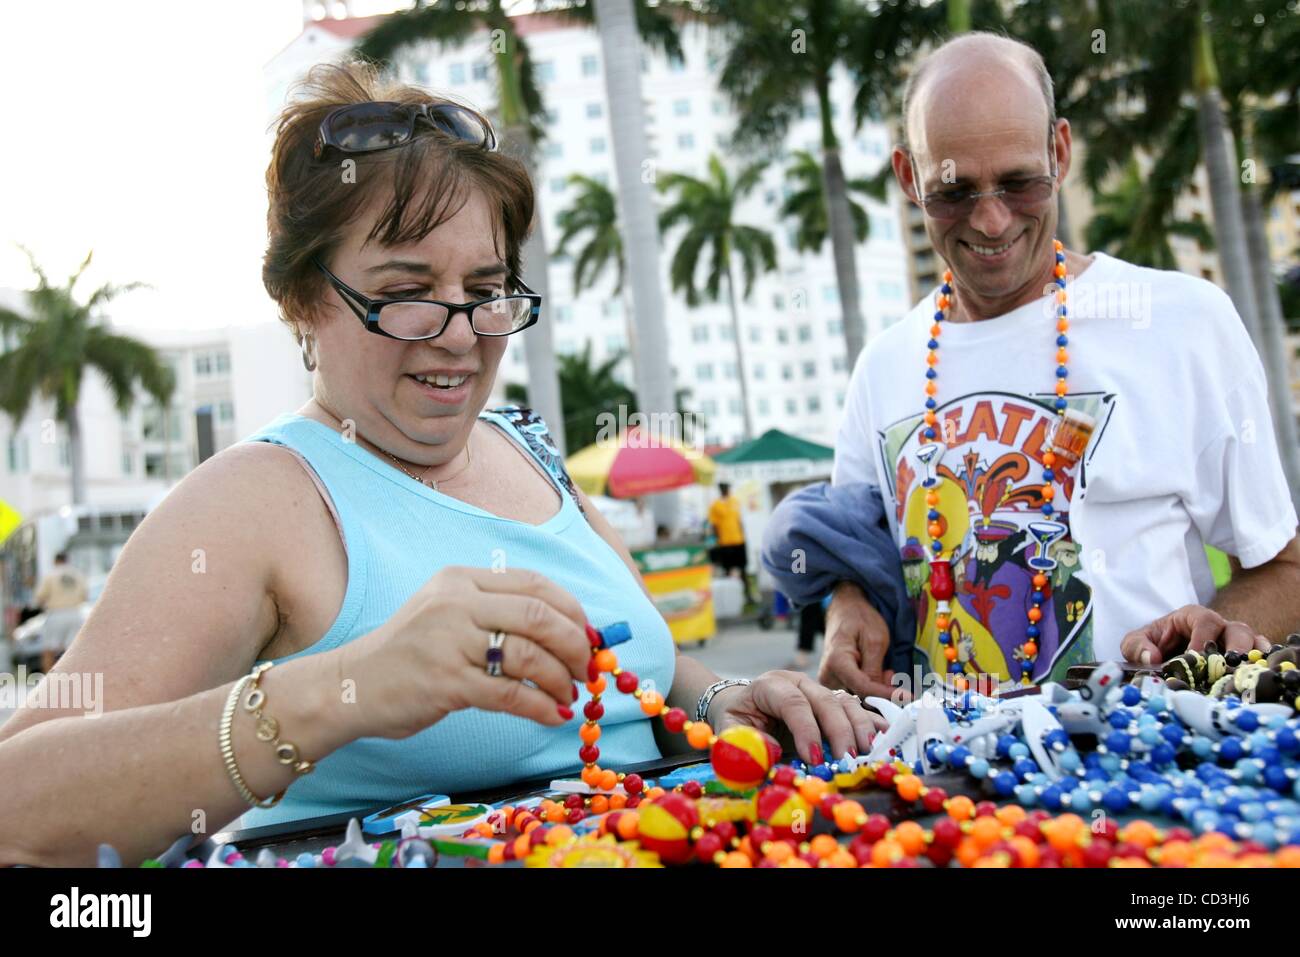 050208 met sunfest 04 Staff Photo by Gary Coronado/The Palm Beach Post 0052248B TBA -- West Palm Beach--Nancy, left, and Bruce Eige, of Boca Raton, buy some beads at SunFest in West Palm Beach Friday. Stock Photo